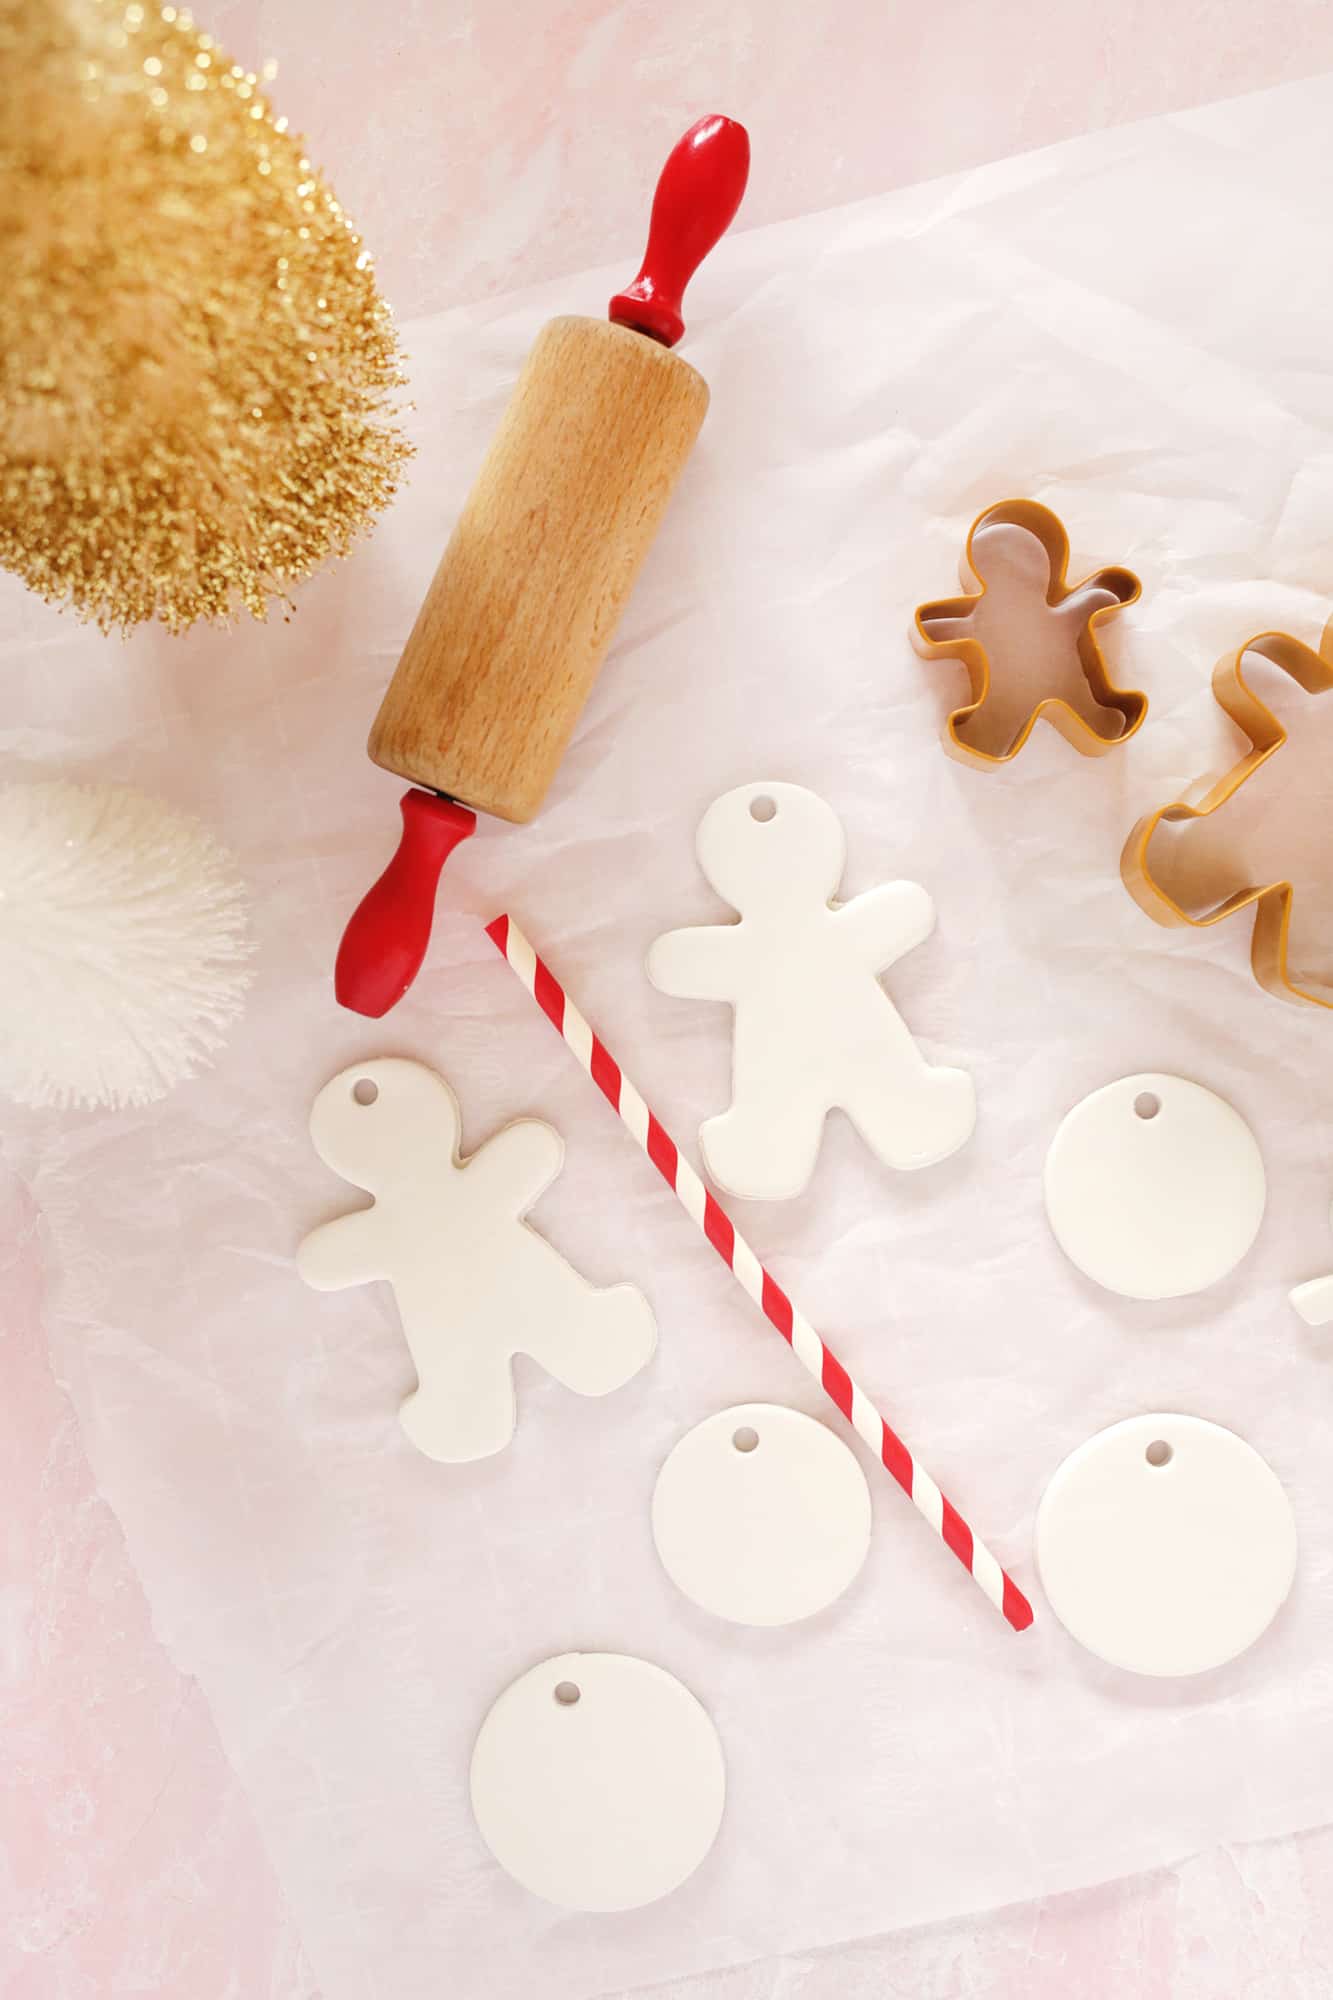 gingerbread people and circle ornaments made from clay 